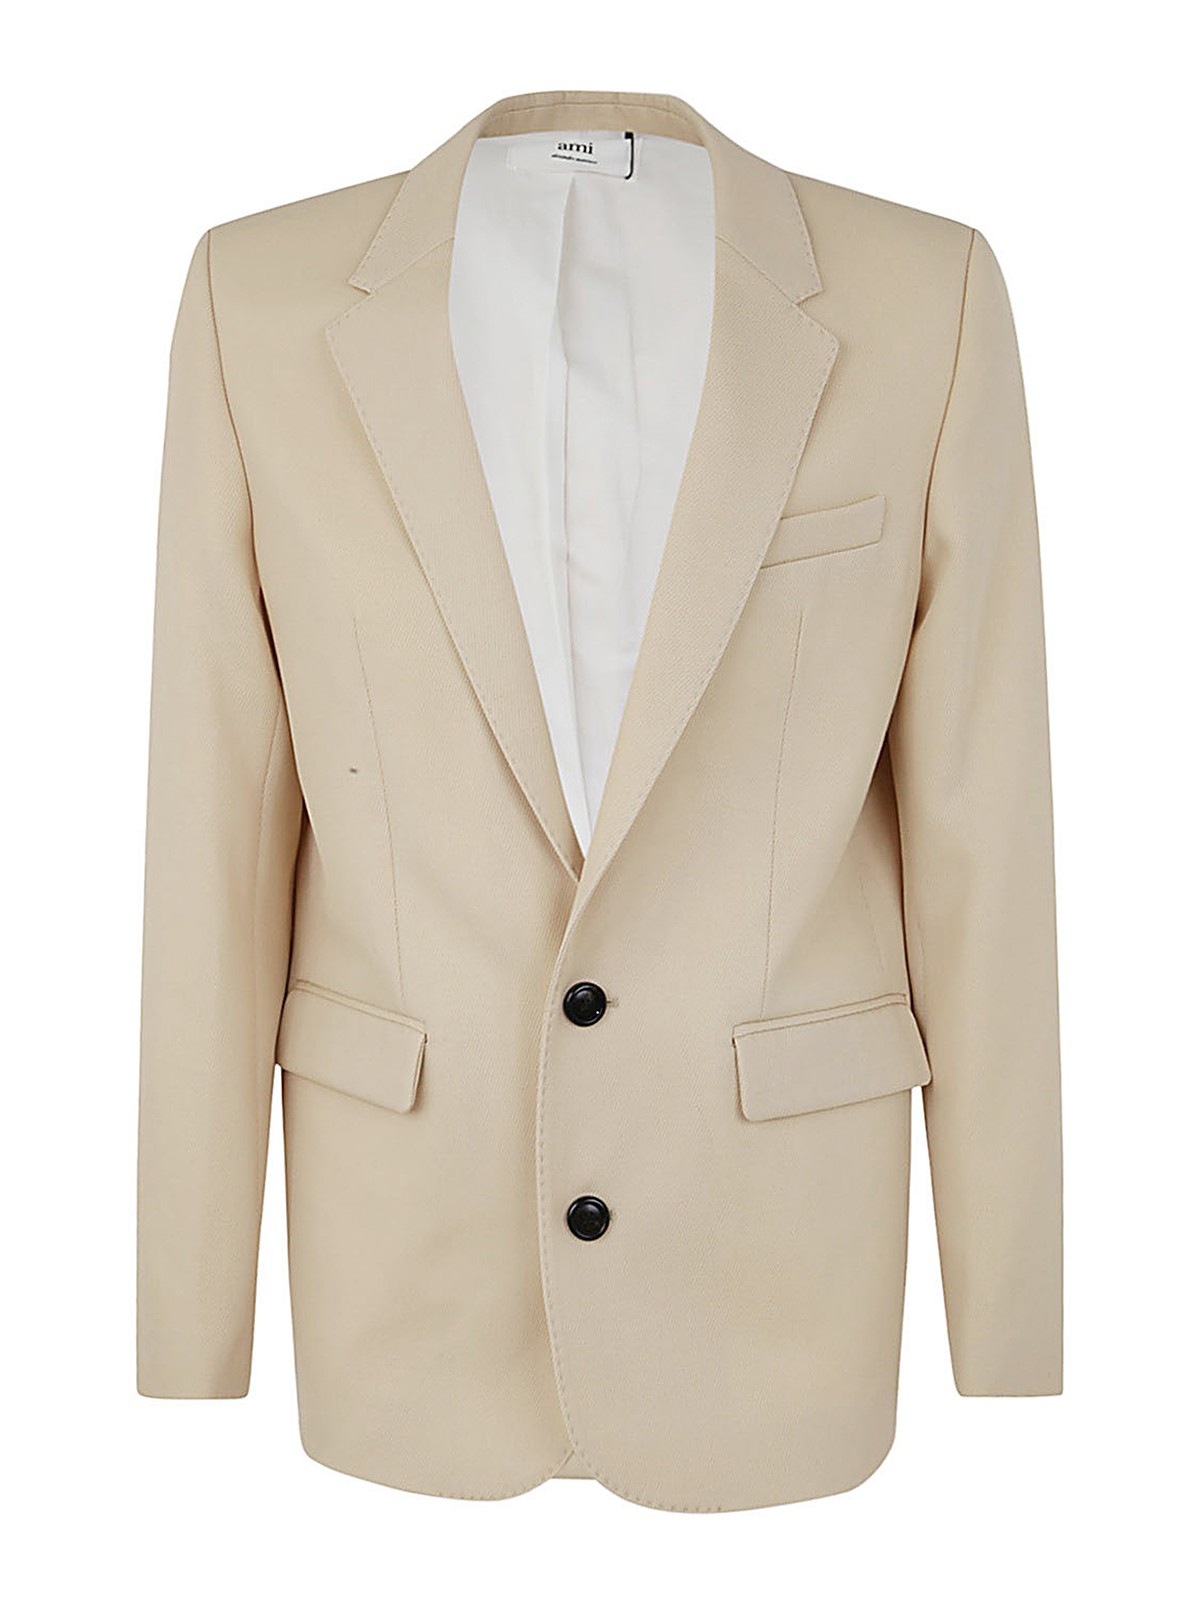 Ami Alexandre Mattiussi Two Buttons Jacket In Nude & Neutrals